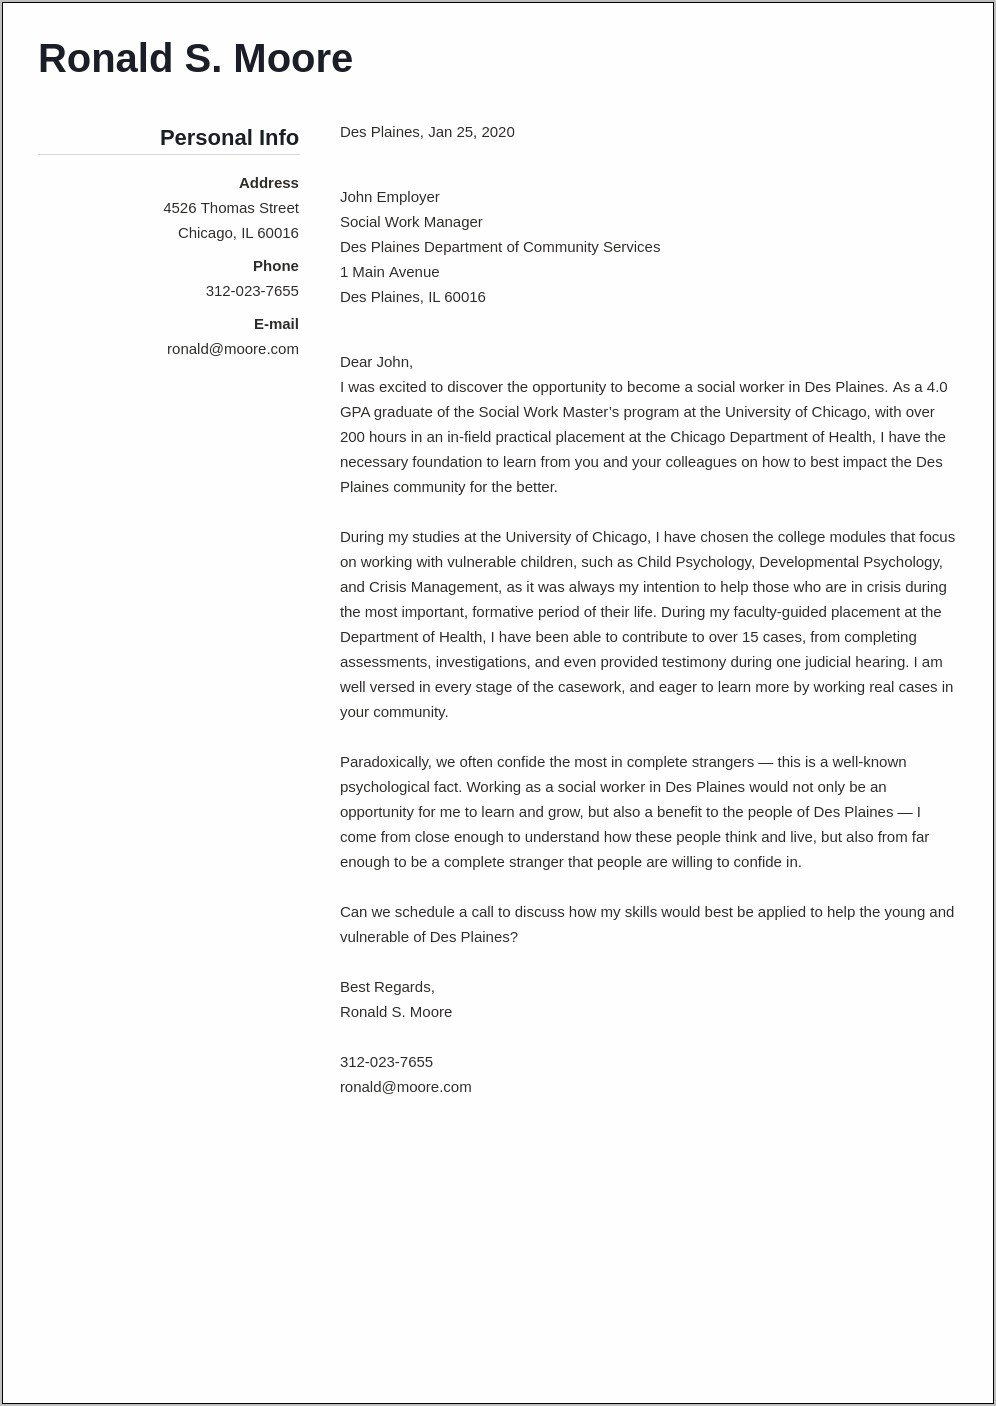 Examples Of Cover Letters For Social Work Resumes